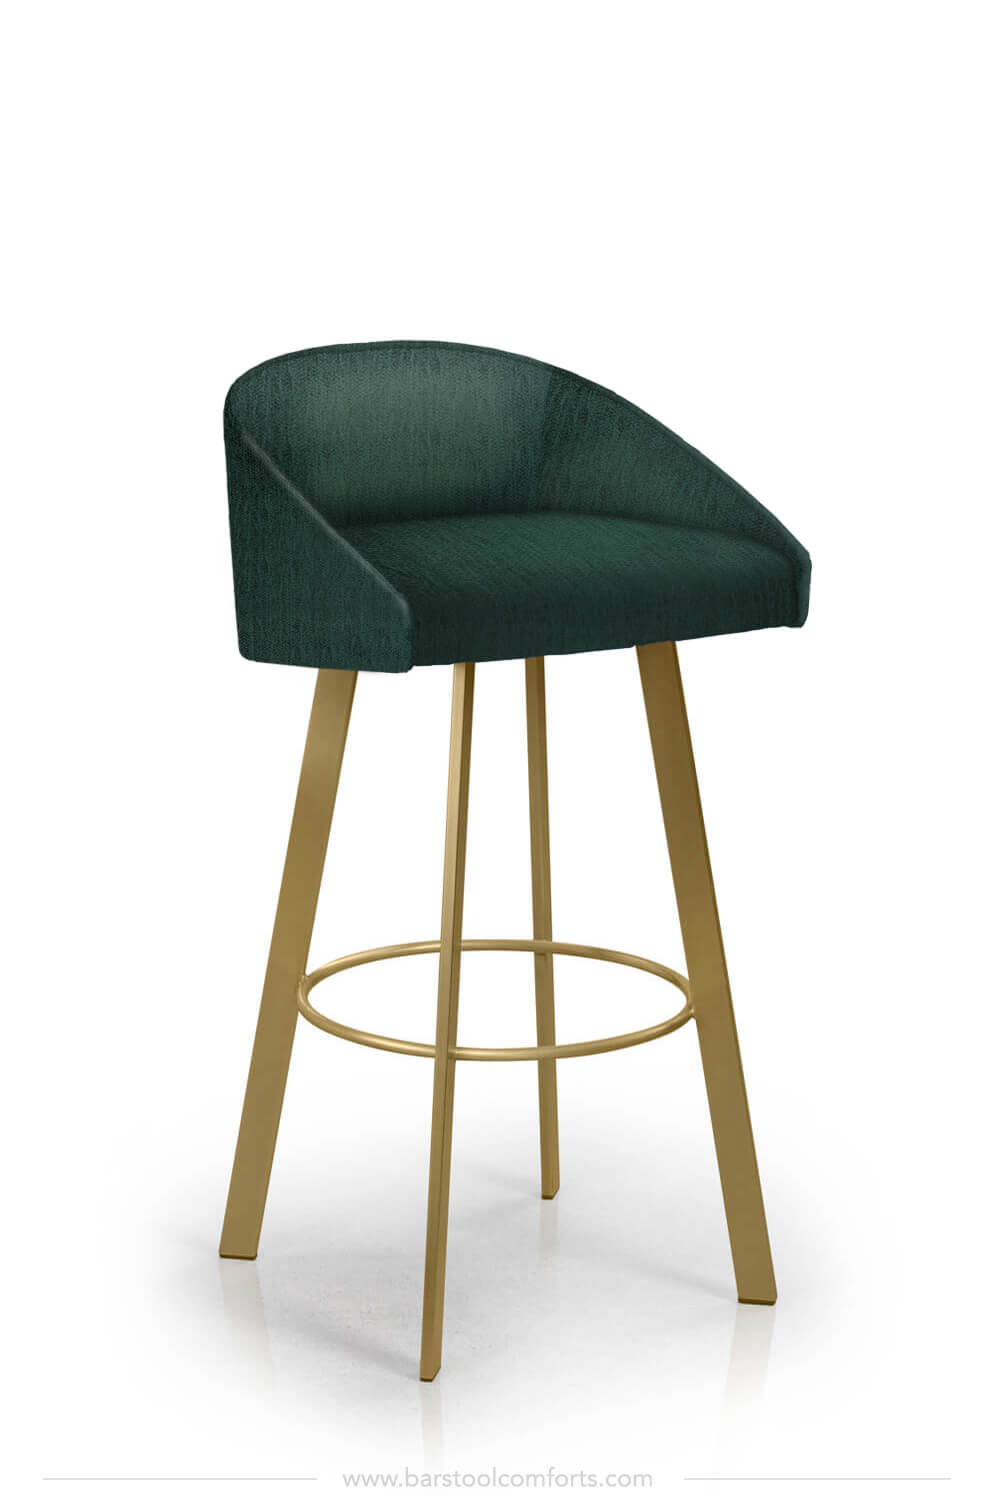 Trica S Liv Swivel Bar Stool With, How To Cut Metal Bar Stools Down